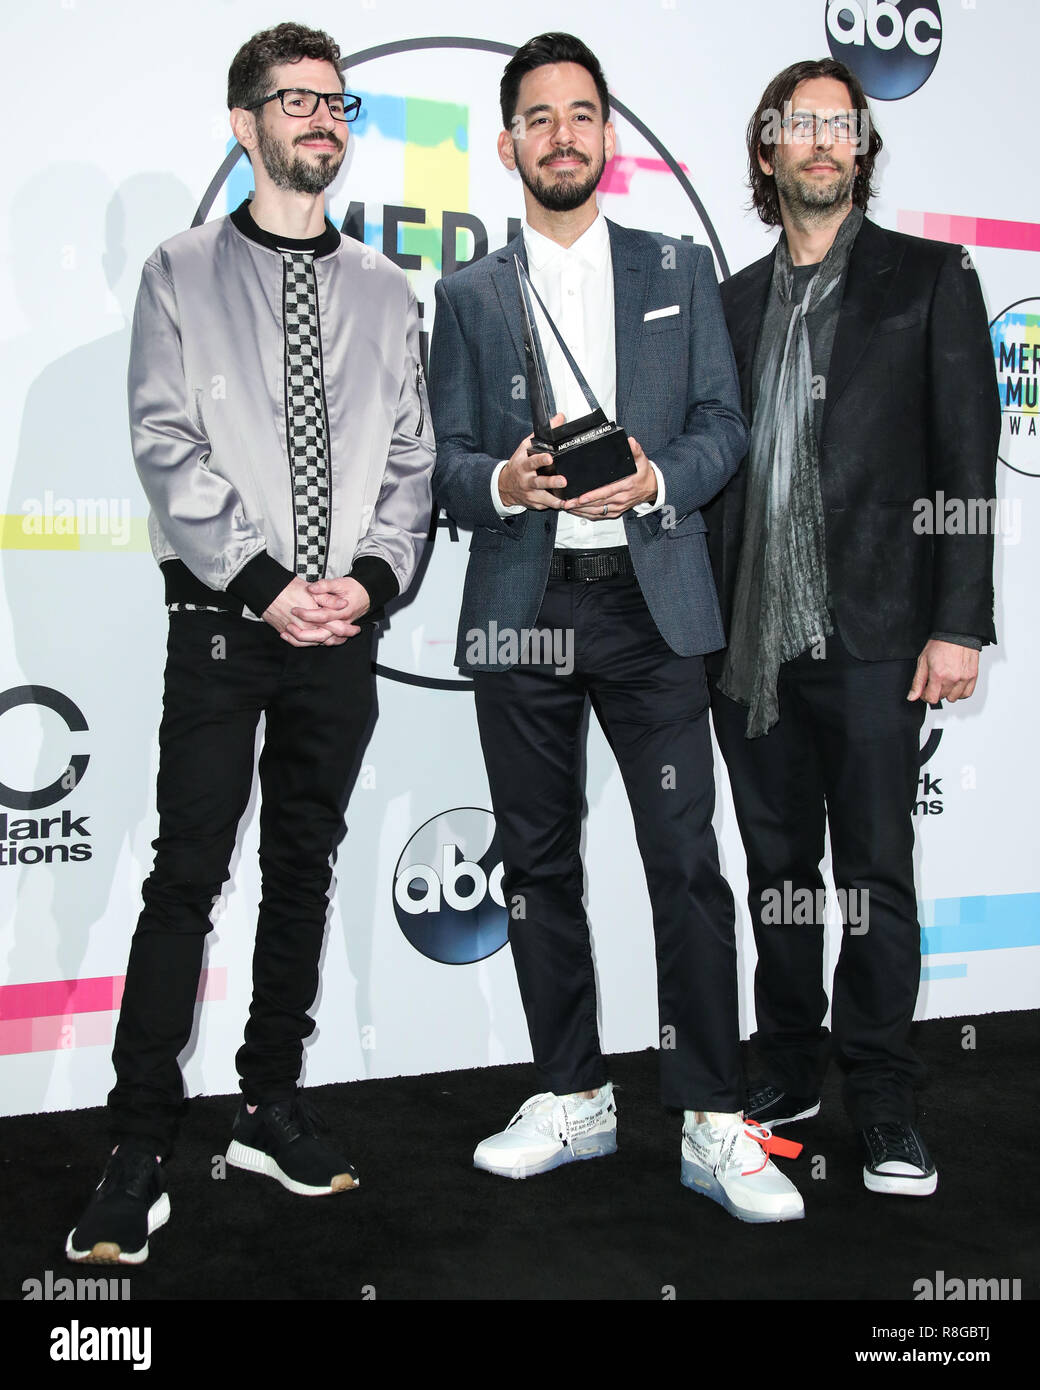 LOS ANGELES, CA, USA - NOVEMBER 19: Brad Delson, Mike Shinoda, Rob Bourdon, Linkin Park in the press room during the 2017 American Music Awards held at the Microsoft Theatre L.A. Live on November 19, 2017 in Los Angeles, California, United States. (Photo by Xavier Collin/Image Press Agency) Stock Photo